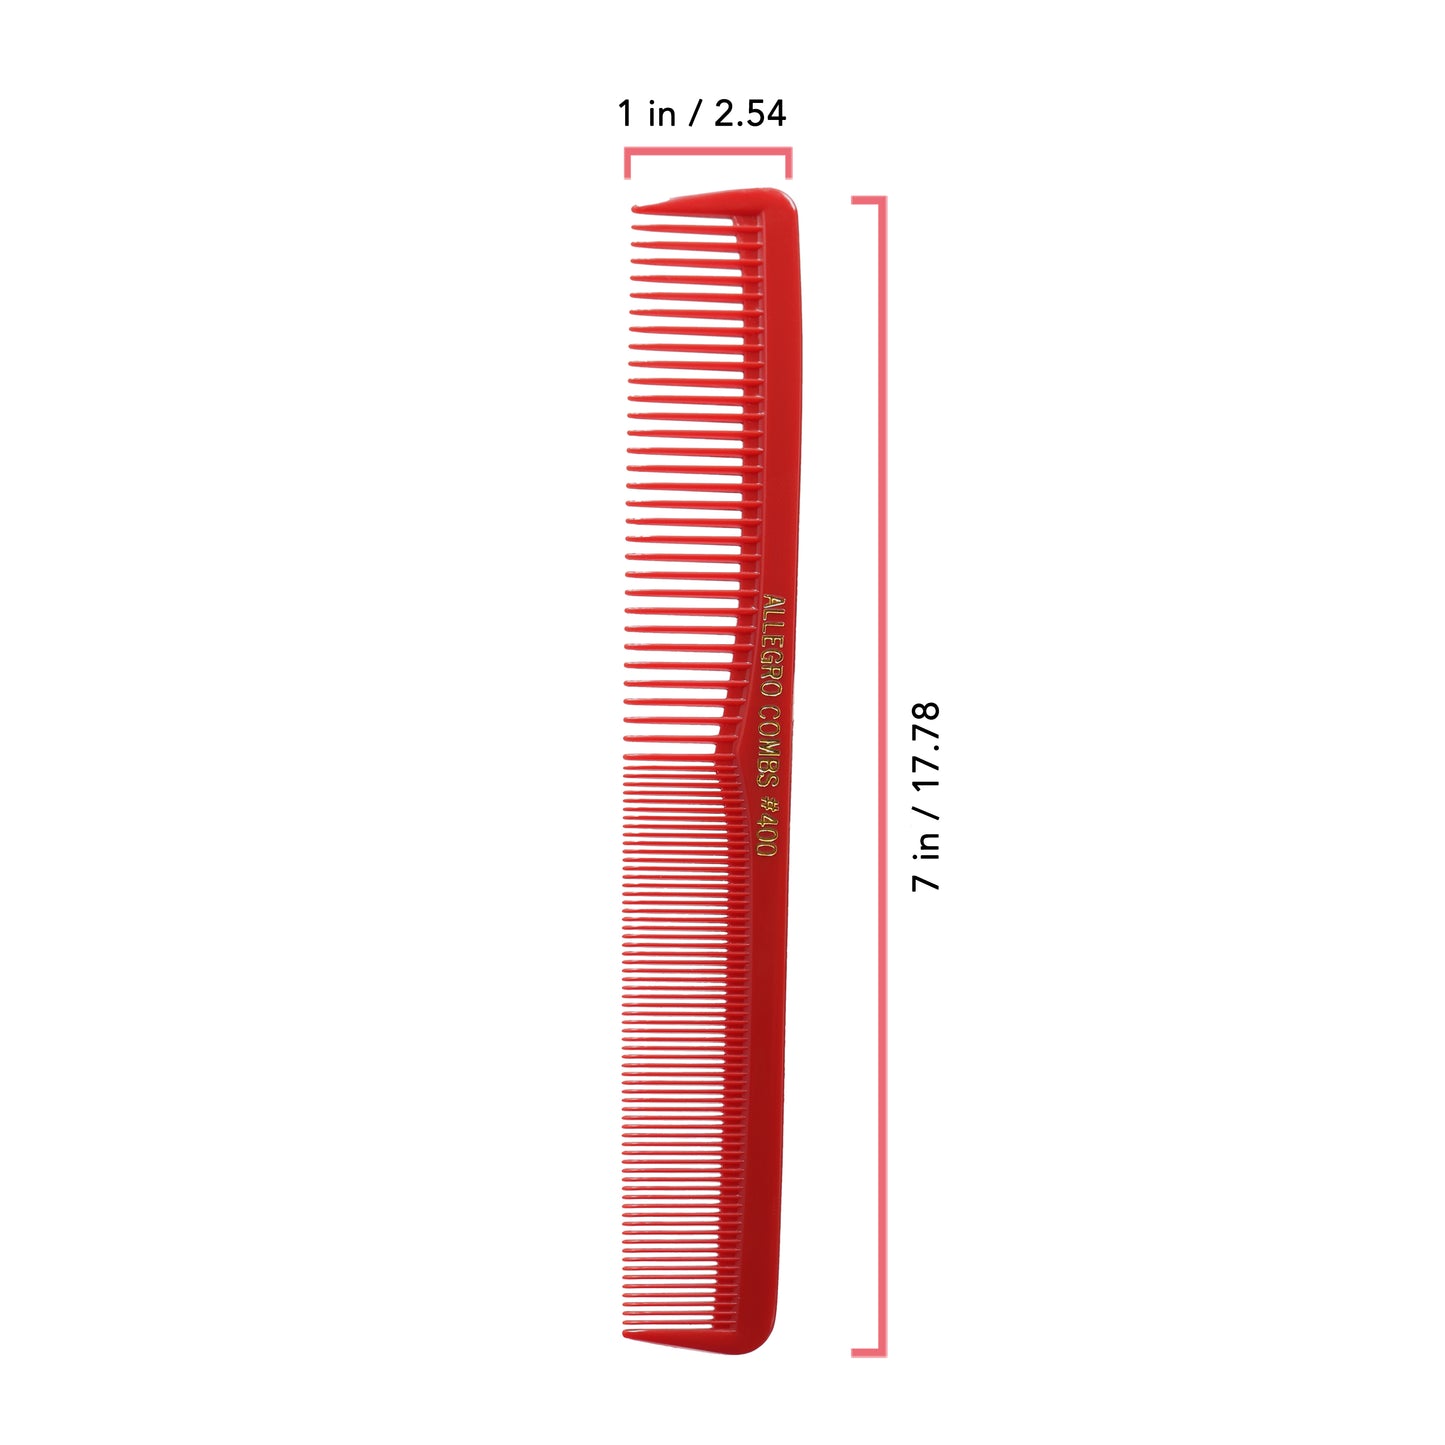 Allegro Combs 400 Barbers Combs Cutting Combs All Purpose Combs. Miixed  12 Pack